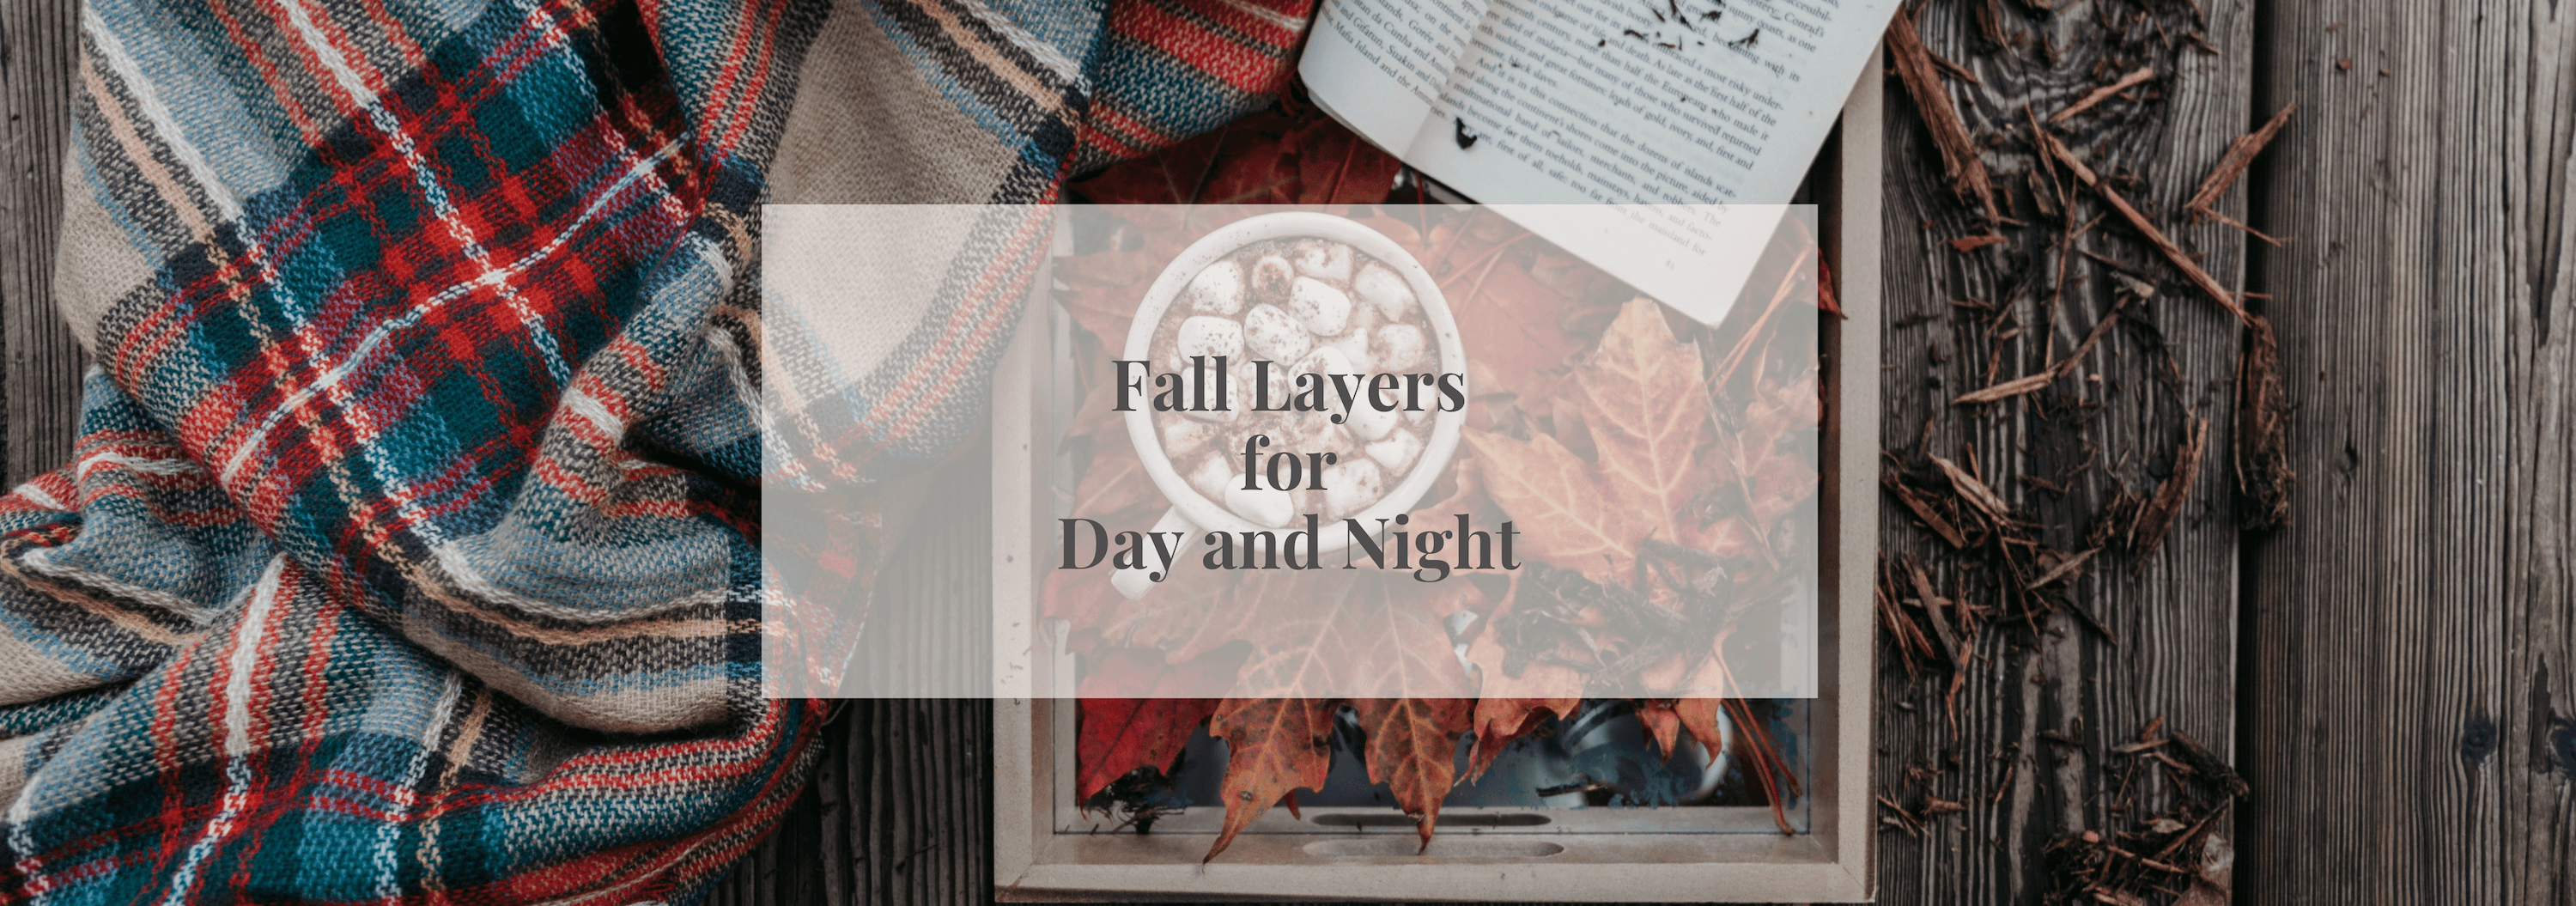 Fall Layers for Day and Night - Numi